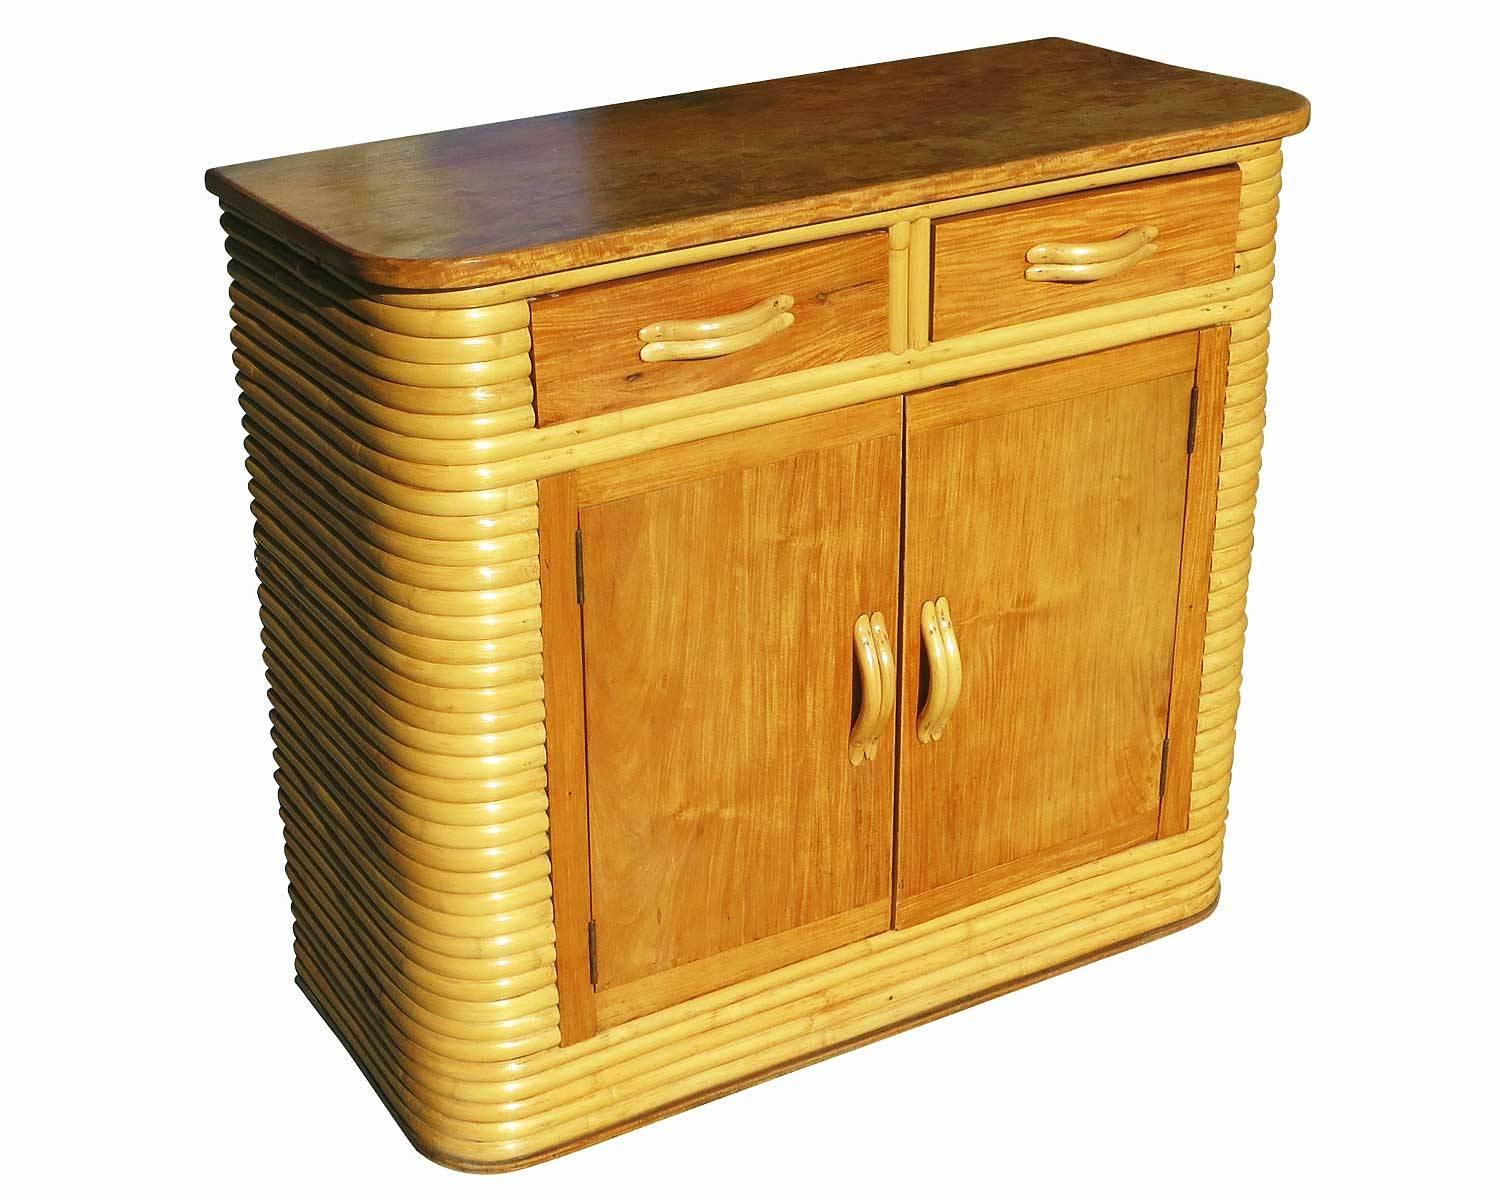 Stacked rattan storage cabinet with a mahogany top and rattan drawer pulls by Valdes Rattancraft. The cabinet features breakfront storage area in the front with two drawers.

Tag states "Steam Treated Valdes Rattancraft Inc.Made in The